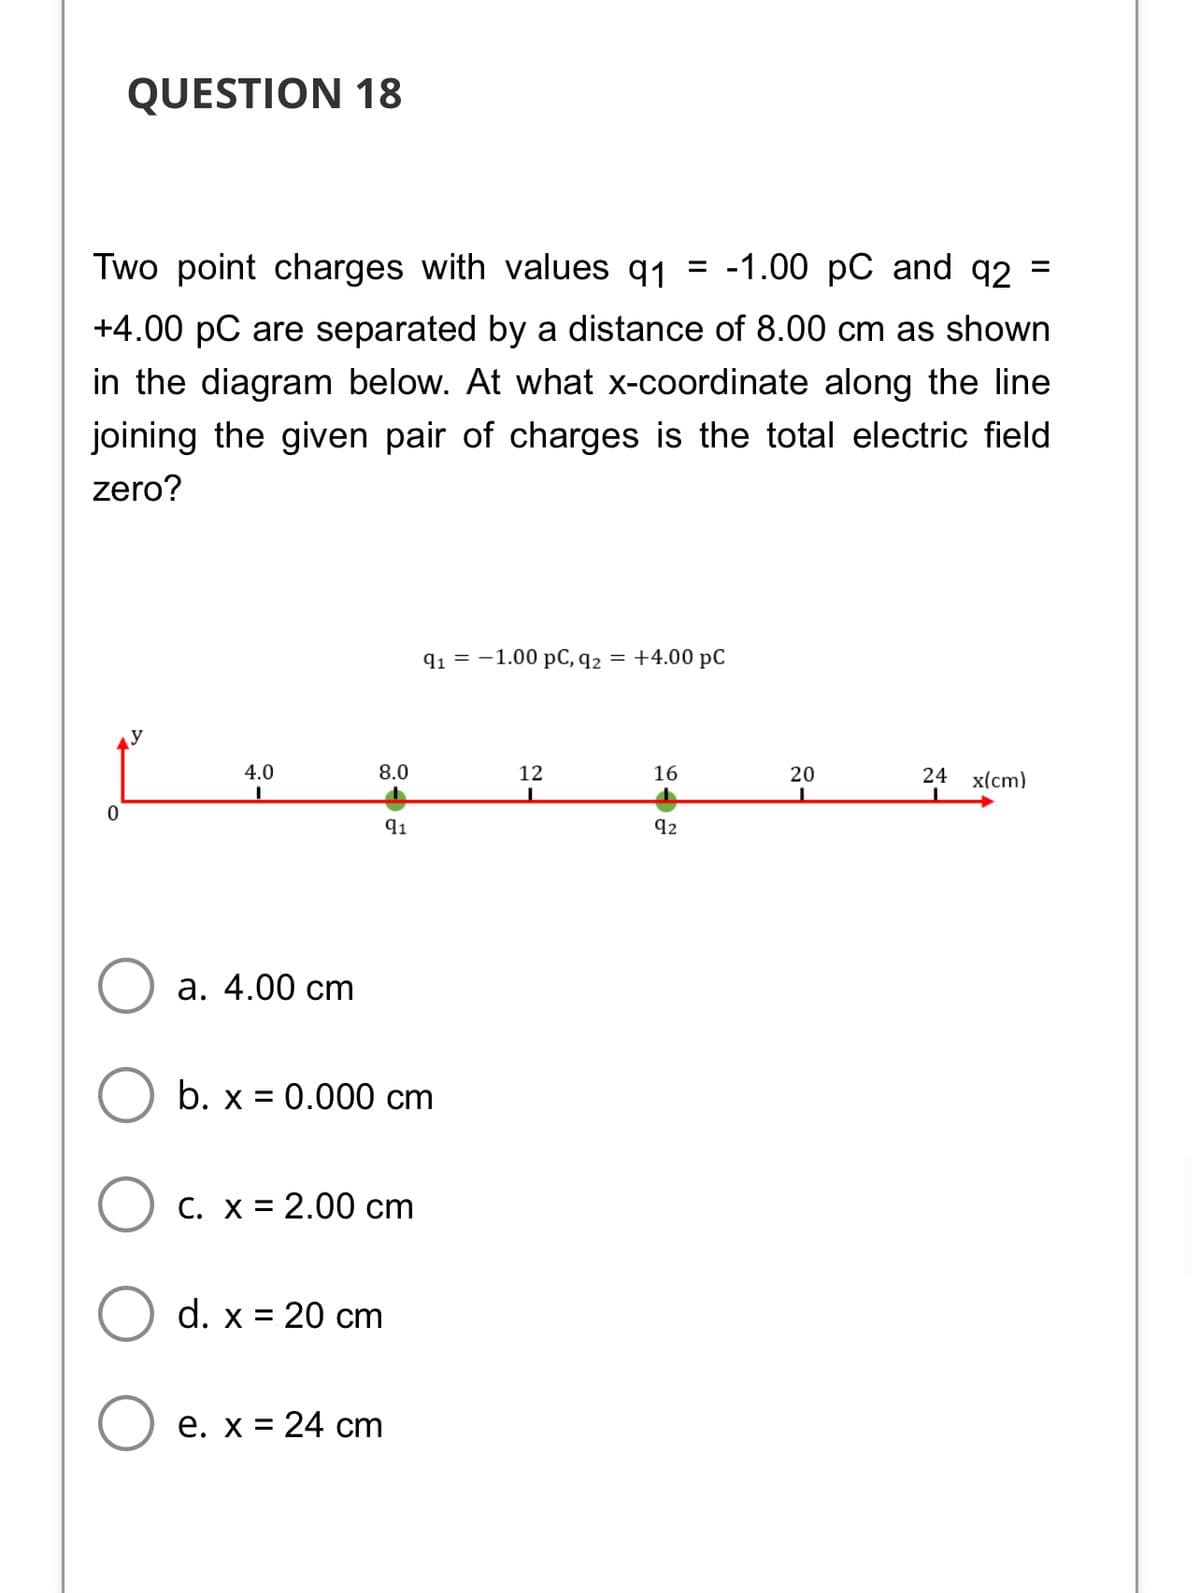 QUESTION 18
Two point charges with values q1 = -1.00 pC and q2 =
+4.00 pC are separated by a distance of 8.00 cm as shown
in the diagram below. At what x-coordinate along the line
joining the given pair of charges is the total electric field
zero?
91%3 —1.00 рС, 92
+4.00 pC
4.0
8.0
12
16
20
24 x(cm)
91
92
а. 4.00 cm
b. x = 0.000 cm
C. x = 2.00 cm
d. x = 20 cm
е. х %3D 24 ст
